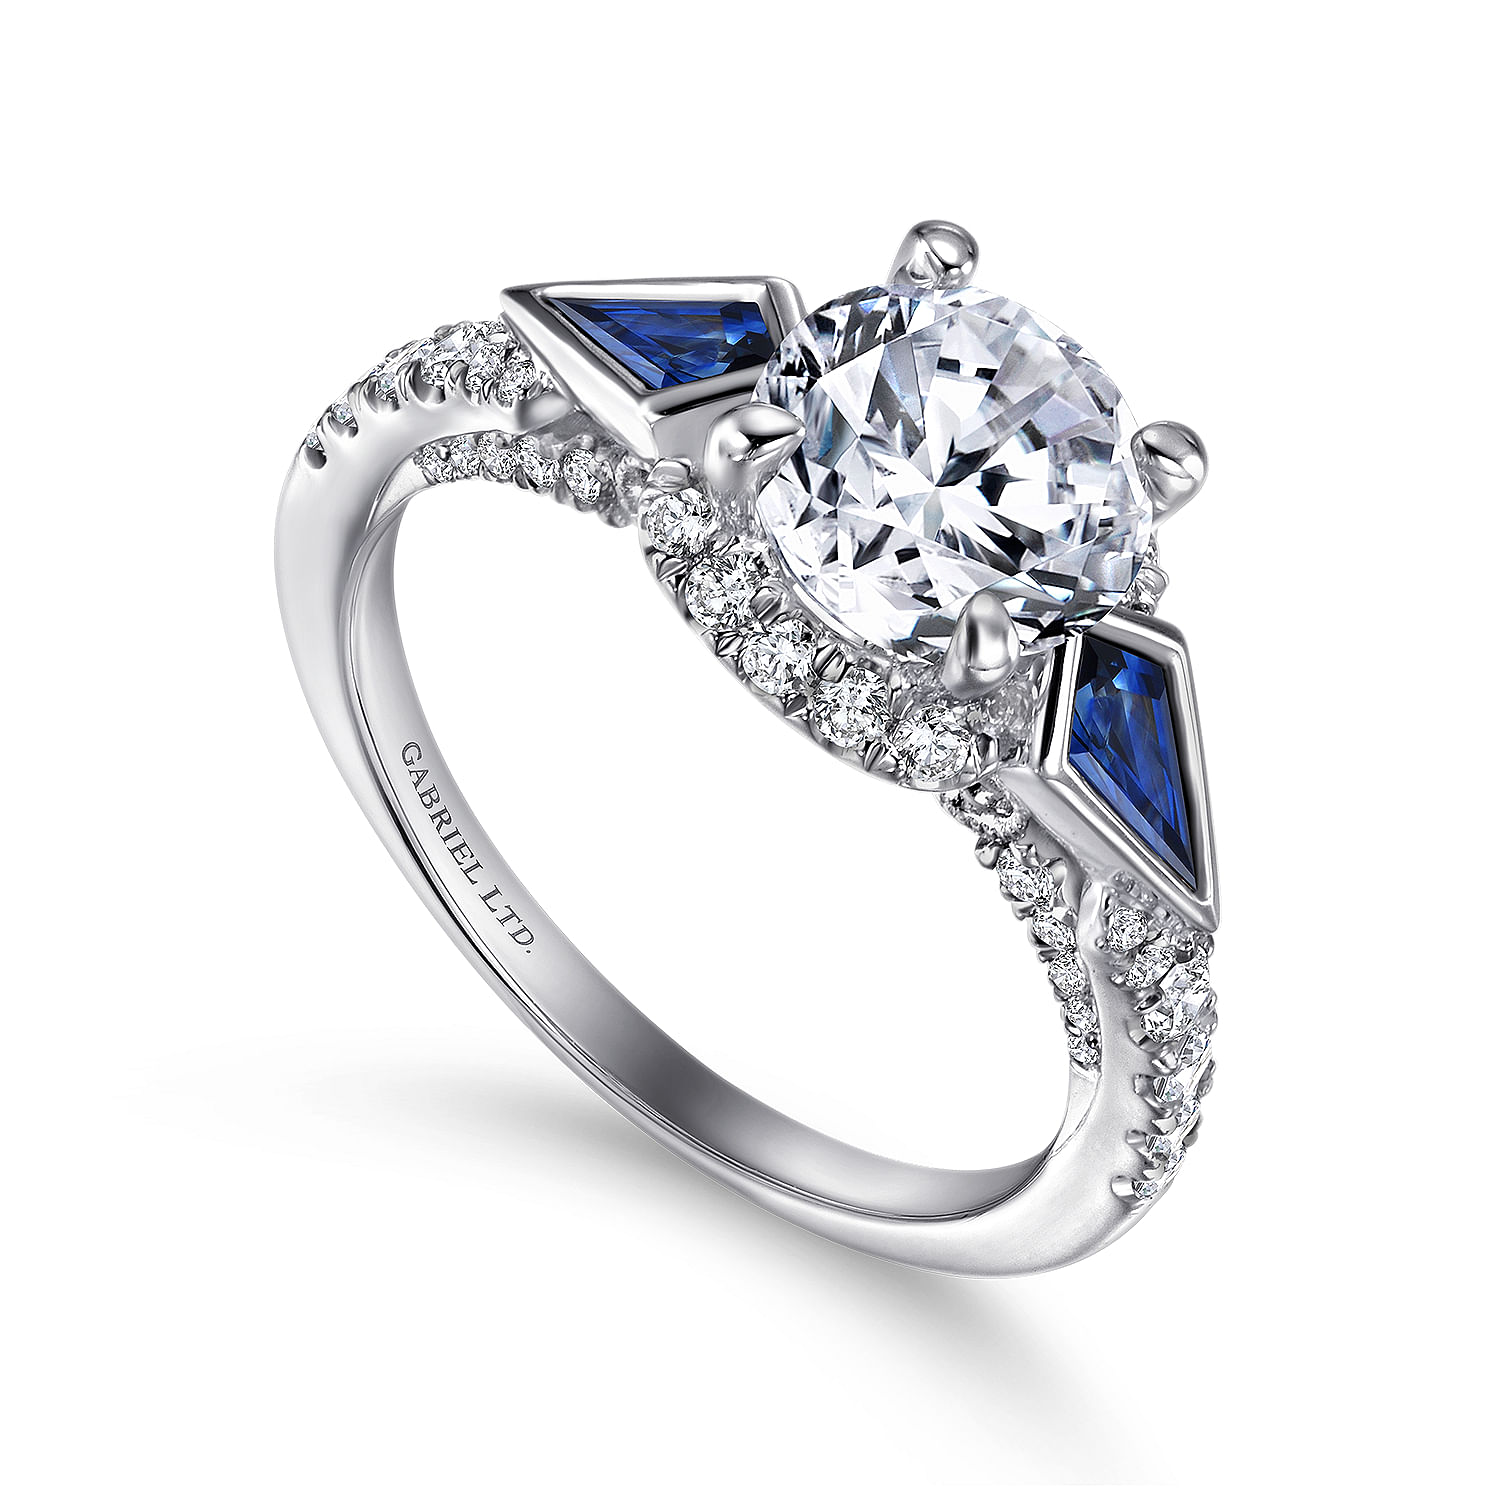 18K White Gold Round Sapphire and Diamond Engagement Ring | ER12125R4W83SA